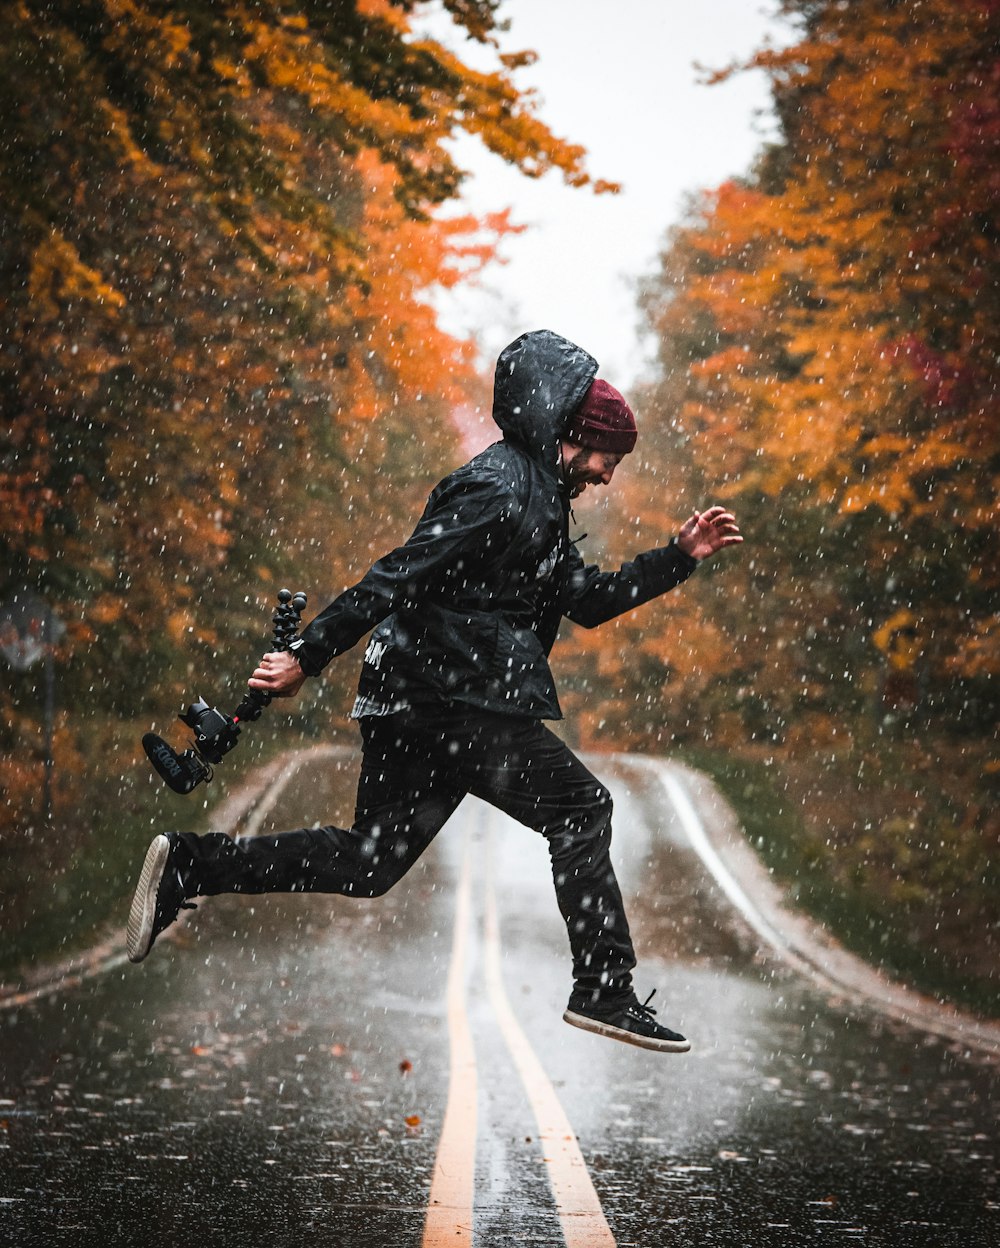 time-lapse photography of man jumping in a road while raining